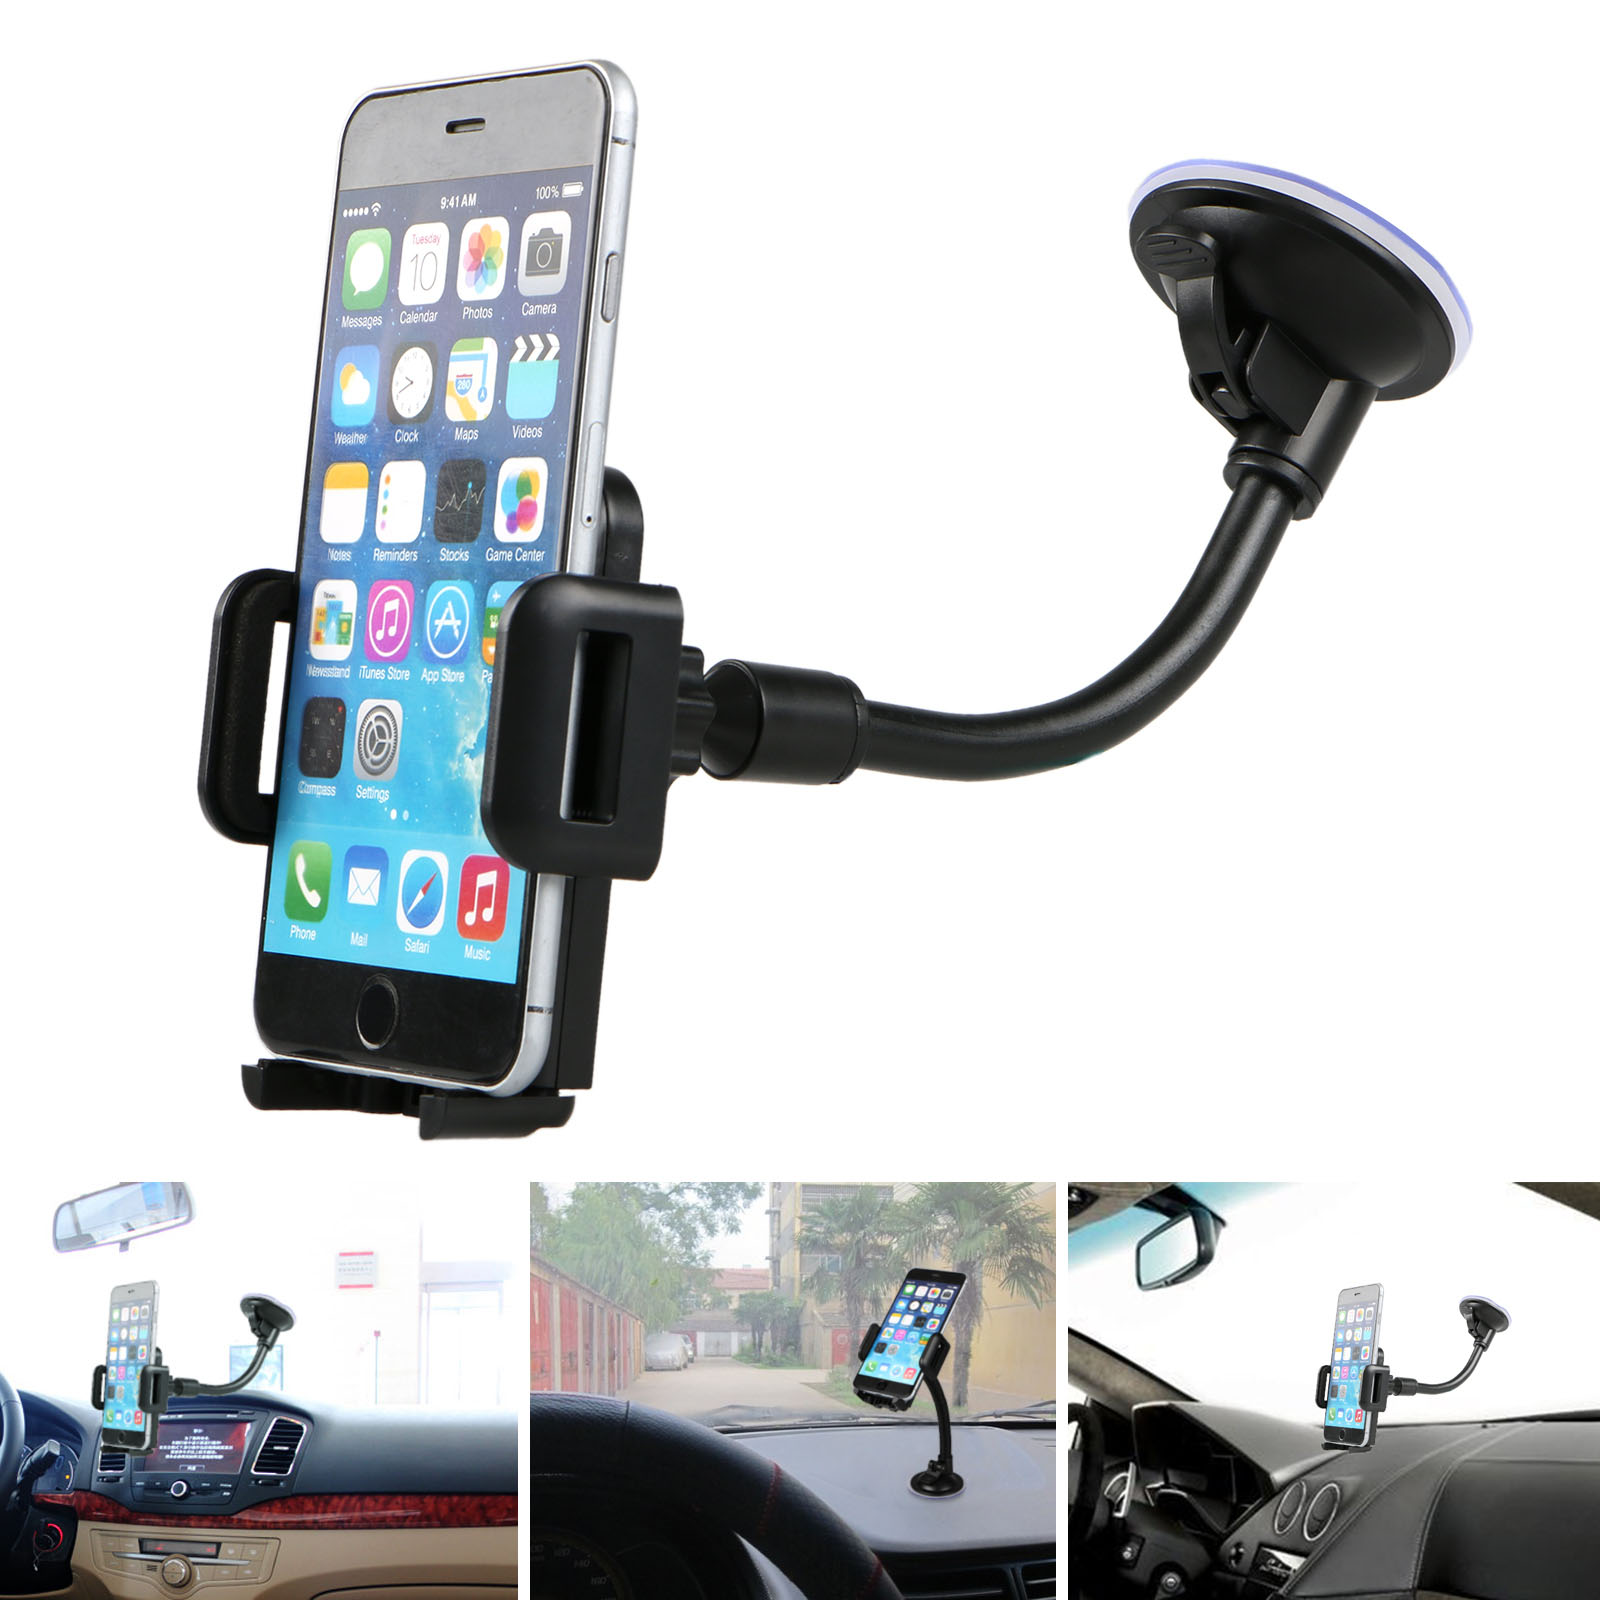 TSV Universal Car Windshield Dashboard Suction Cup 360 Degree Mount Holder Stand for Cellphones iPhone Android, Long Arm Car Phone Holder Windscreen Car Cradle - image 1 of 9